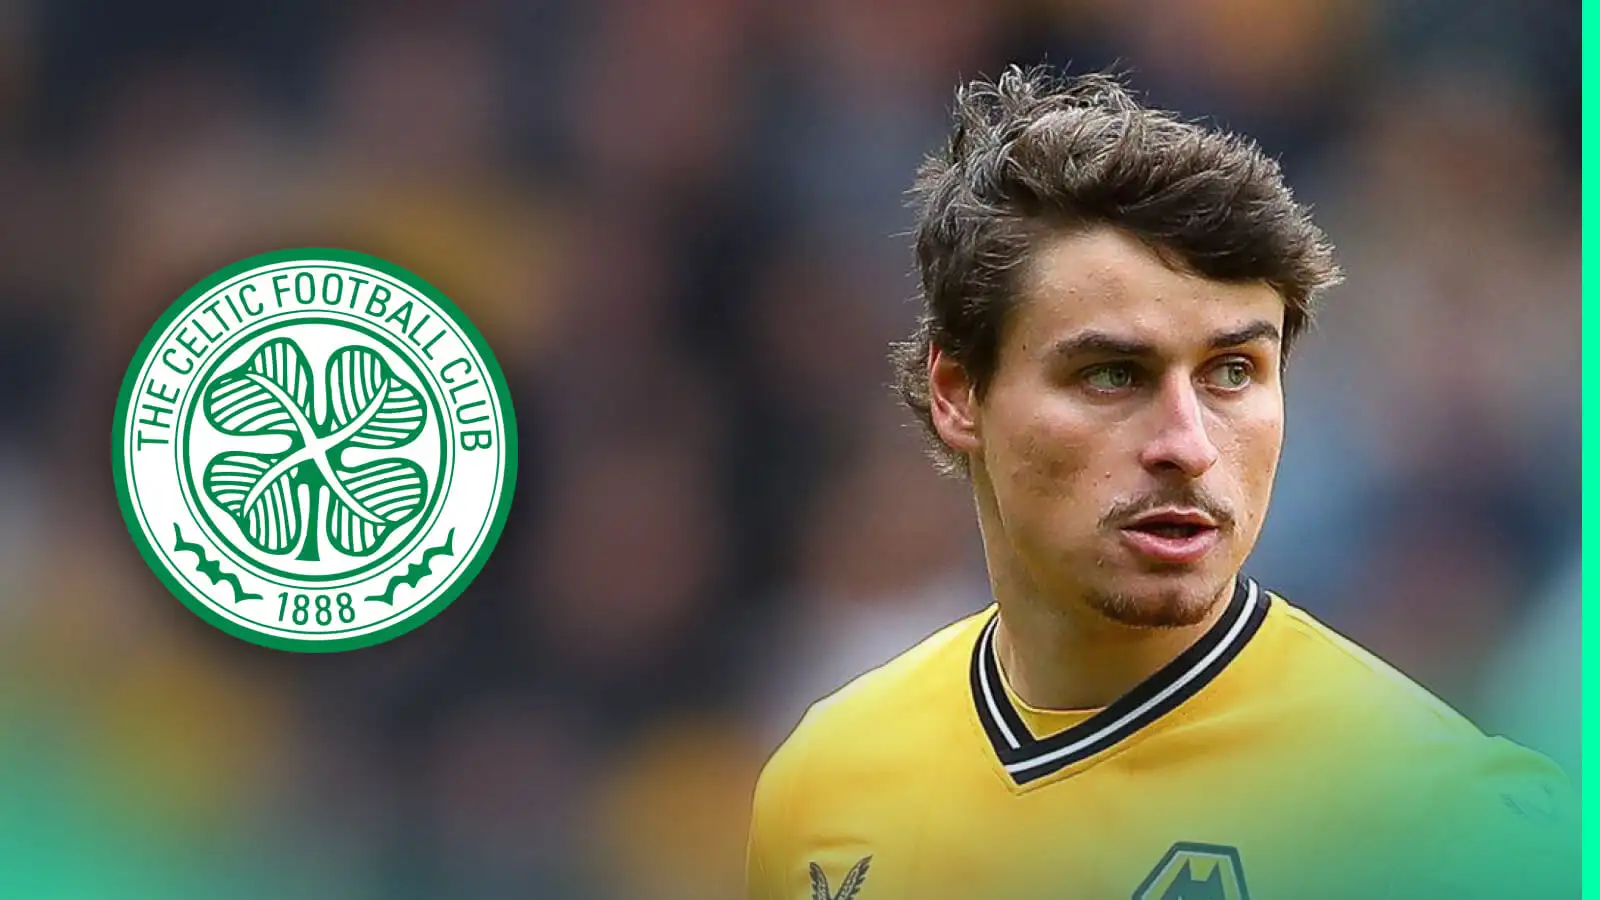 Celtic to try again for Wolves star after failed January approach as Rodgers eyes cover for priority position